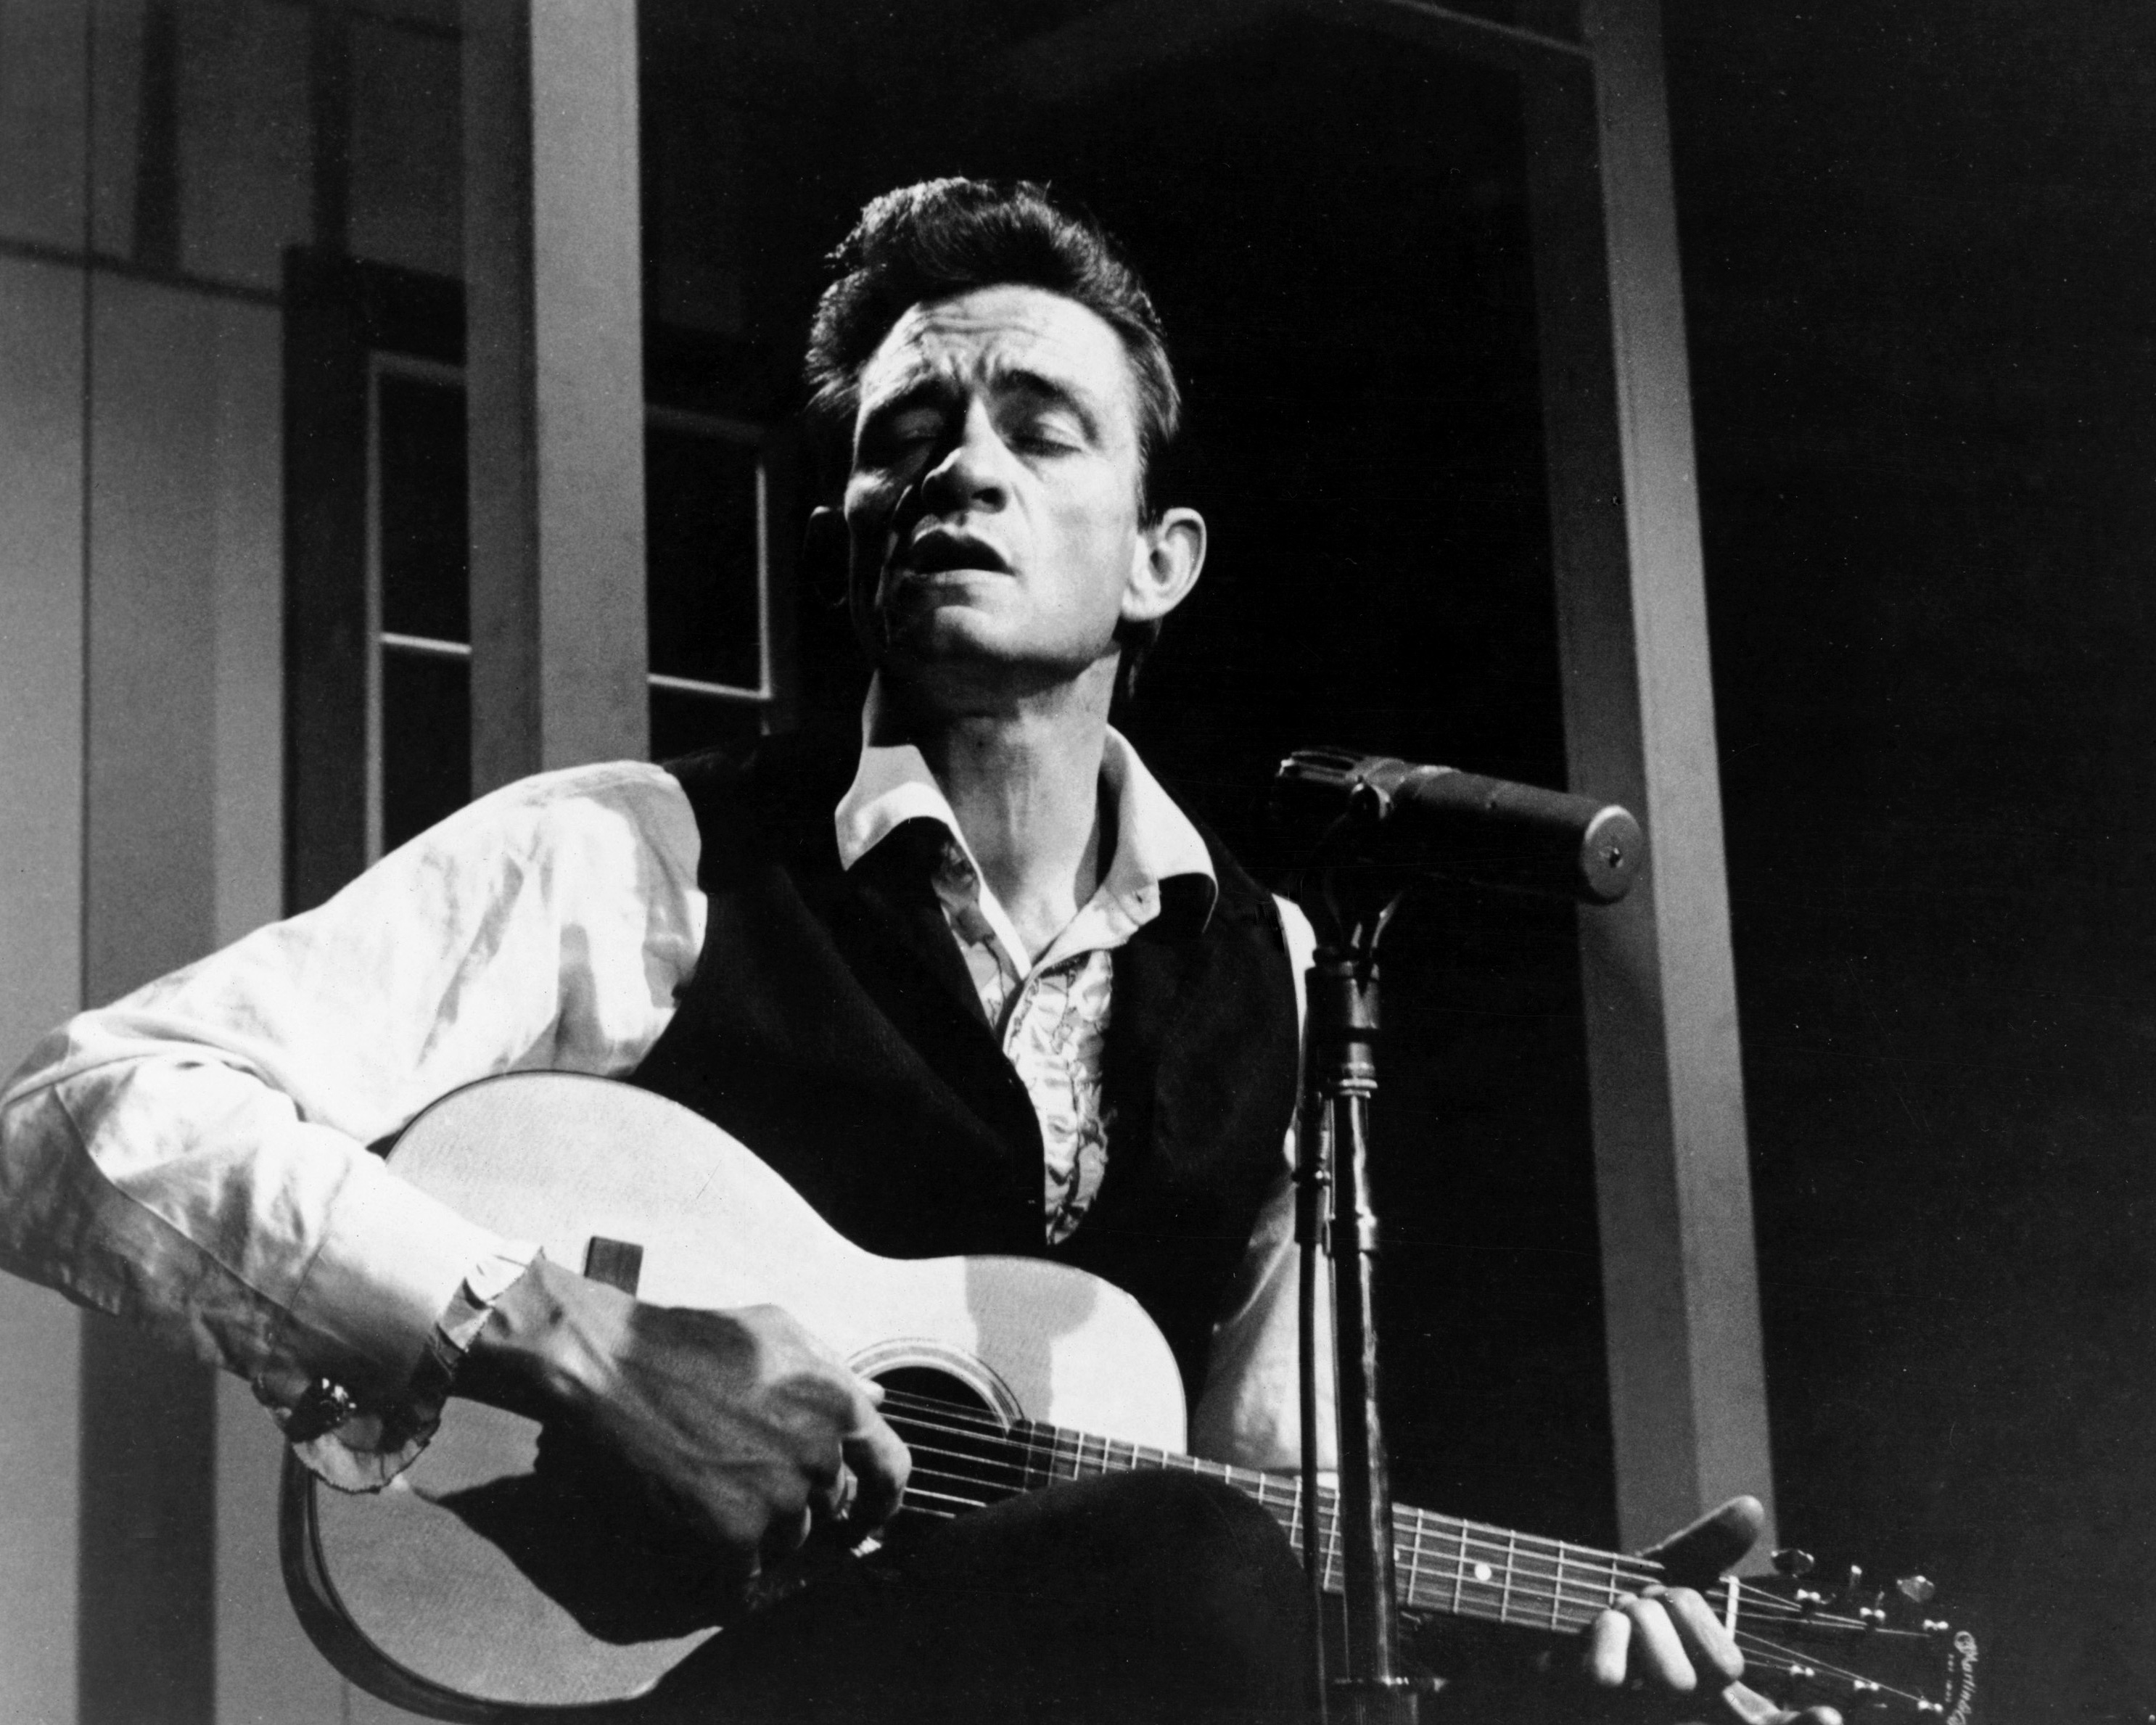 Johnny Cash performs a song with his guitar.